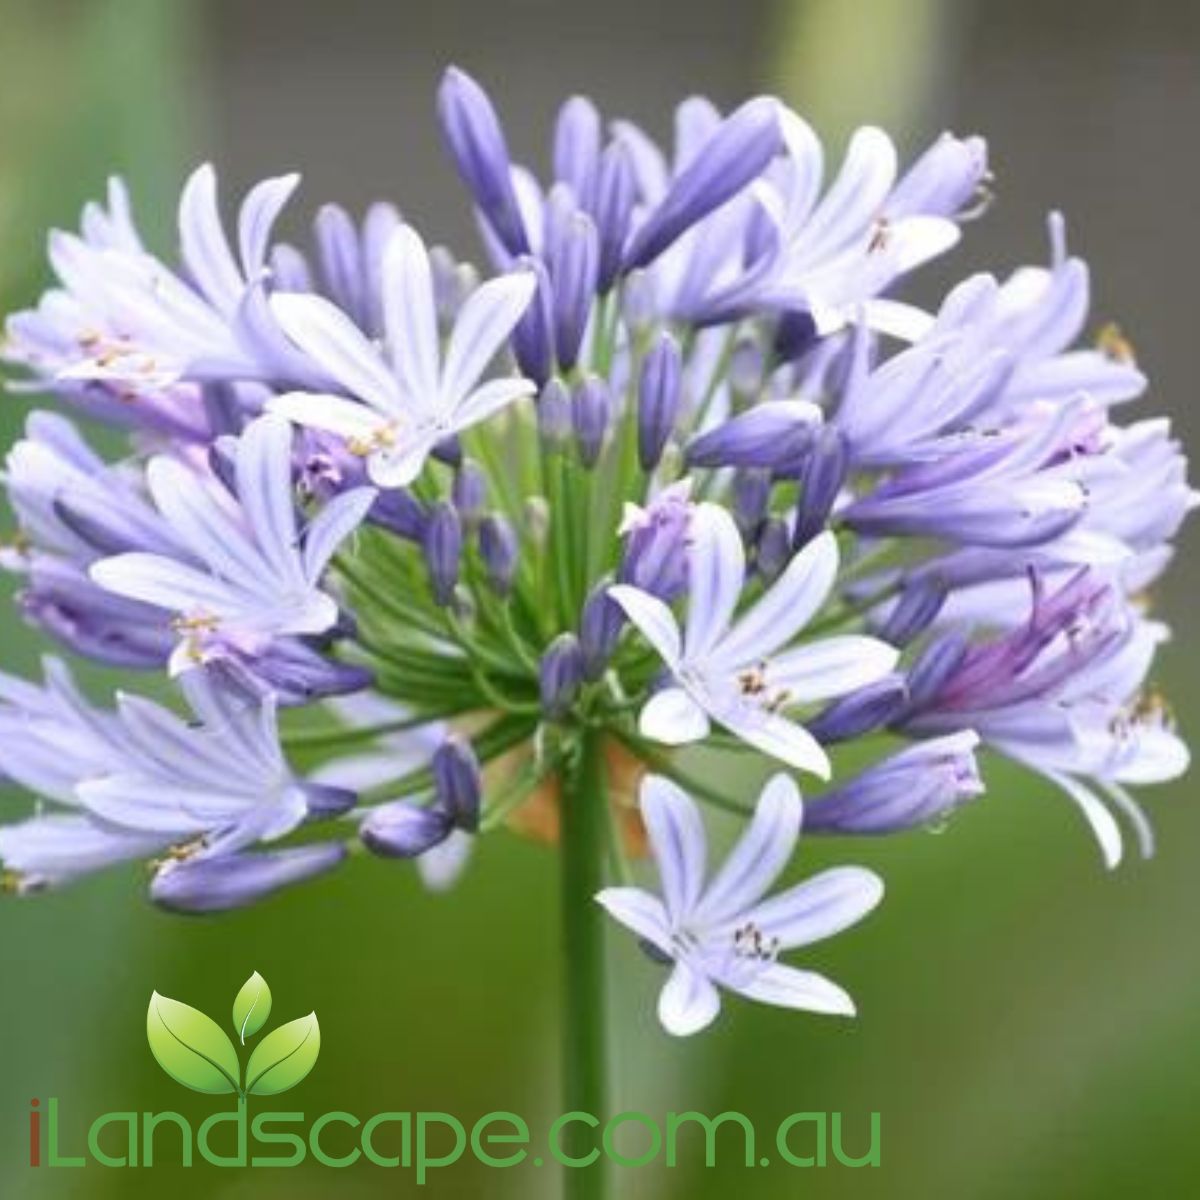 Agapanthus Periwinkle is a little sister to swarf agapanthus 'Baby Pete' and has all the hardiness of and strong features as Baby Pete agapanthus. 